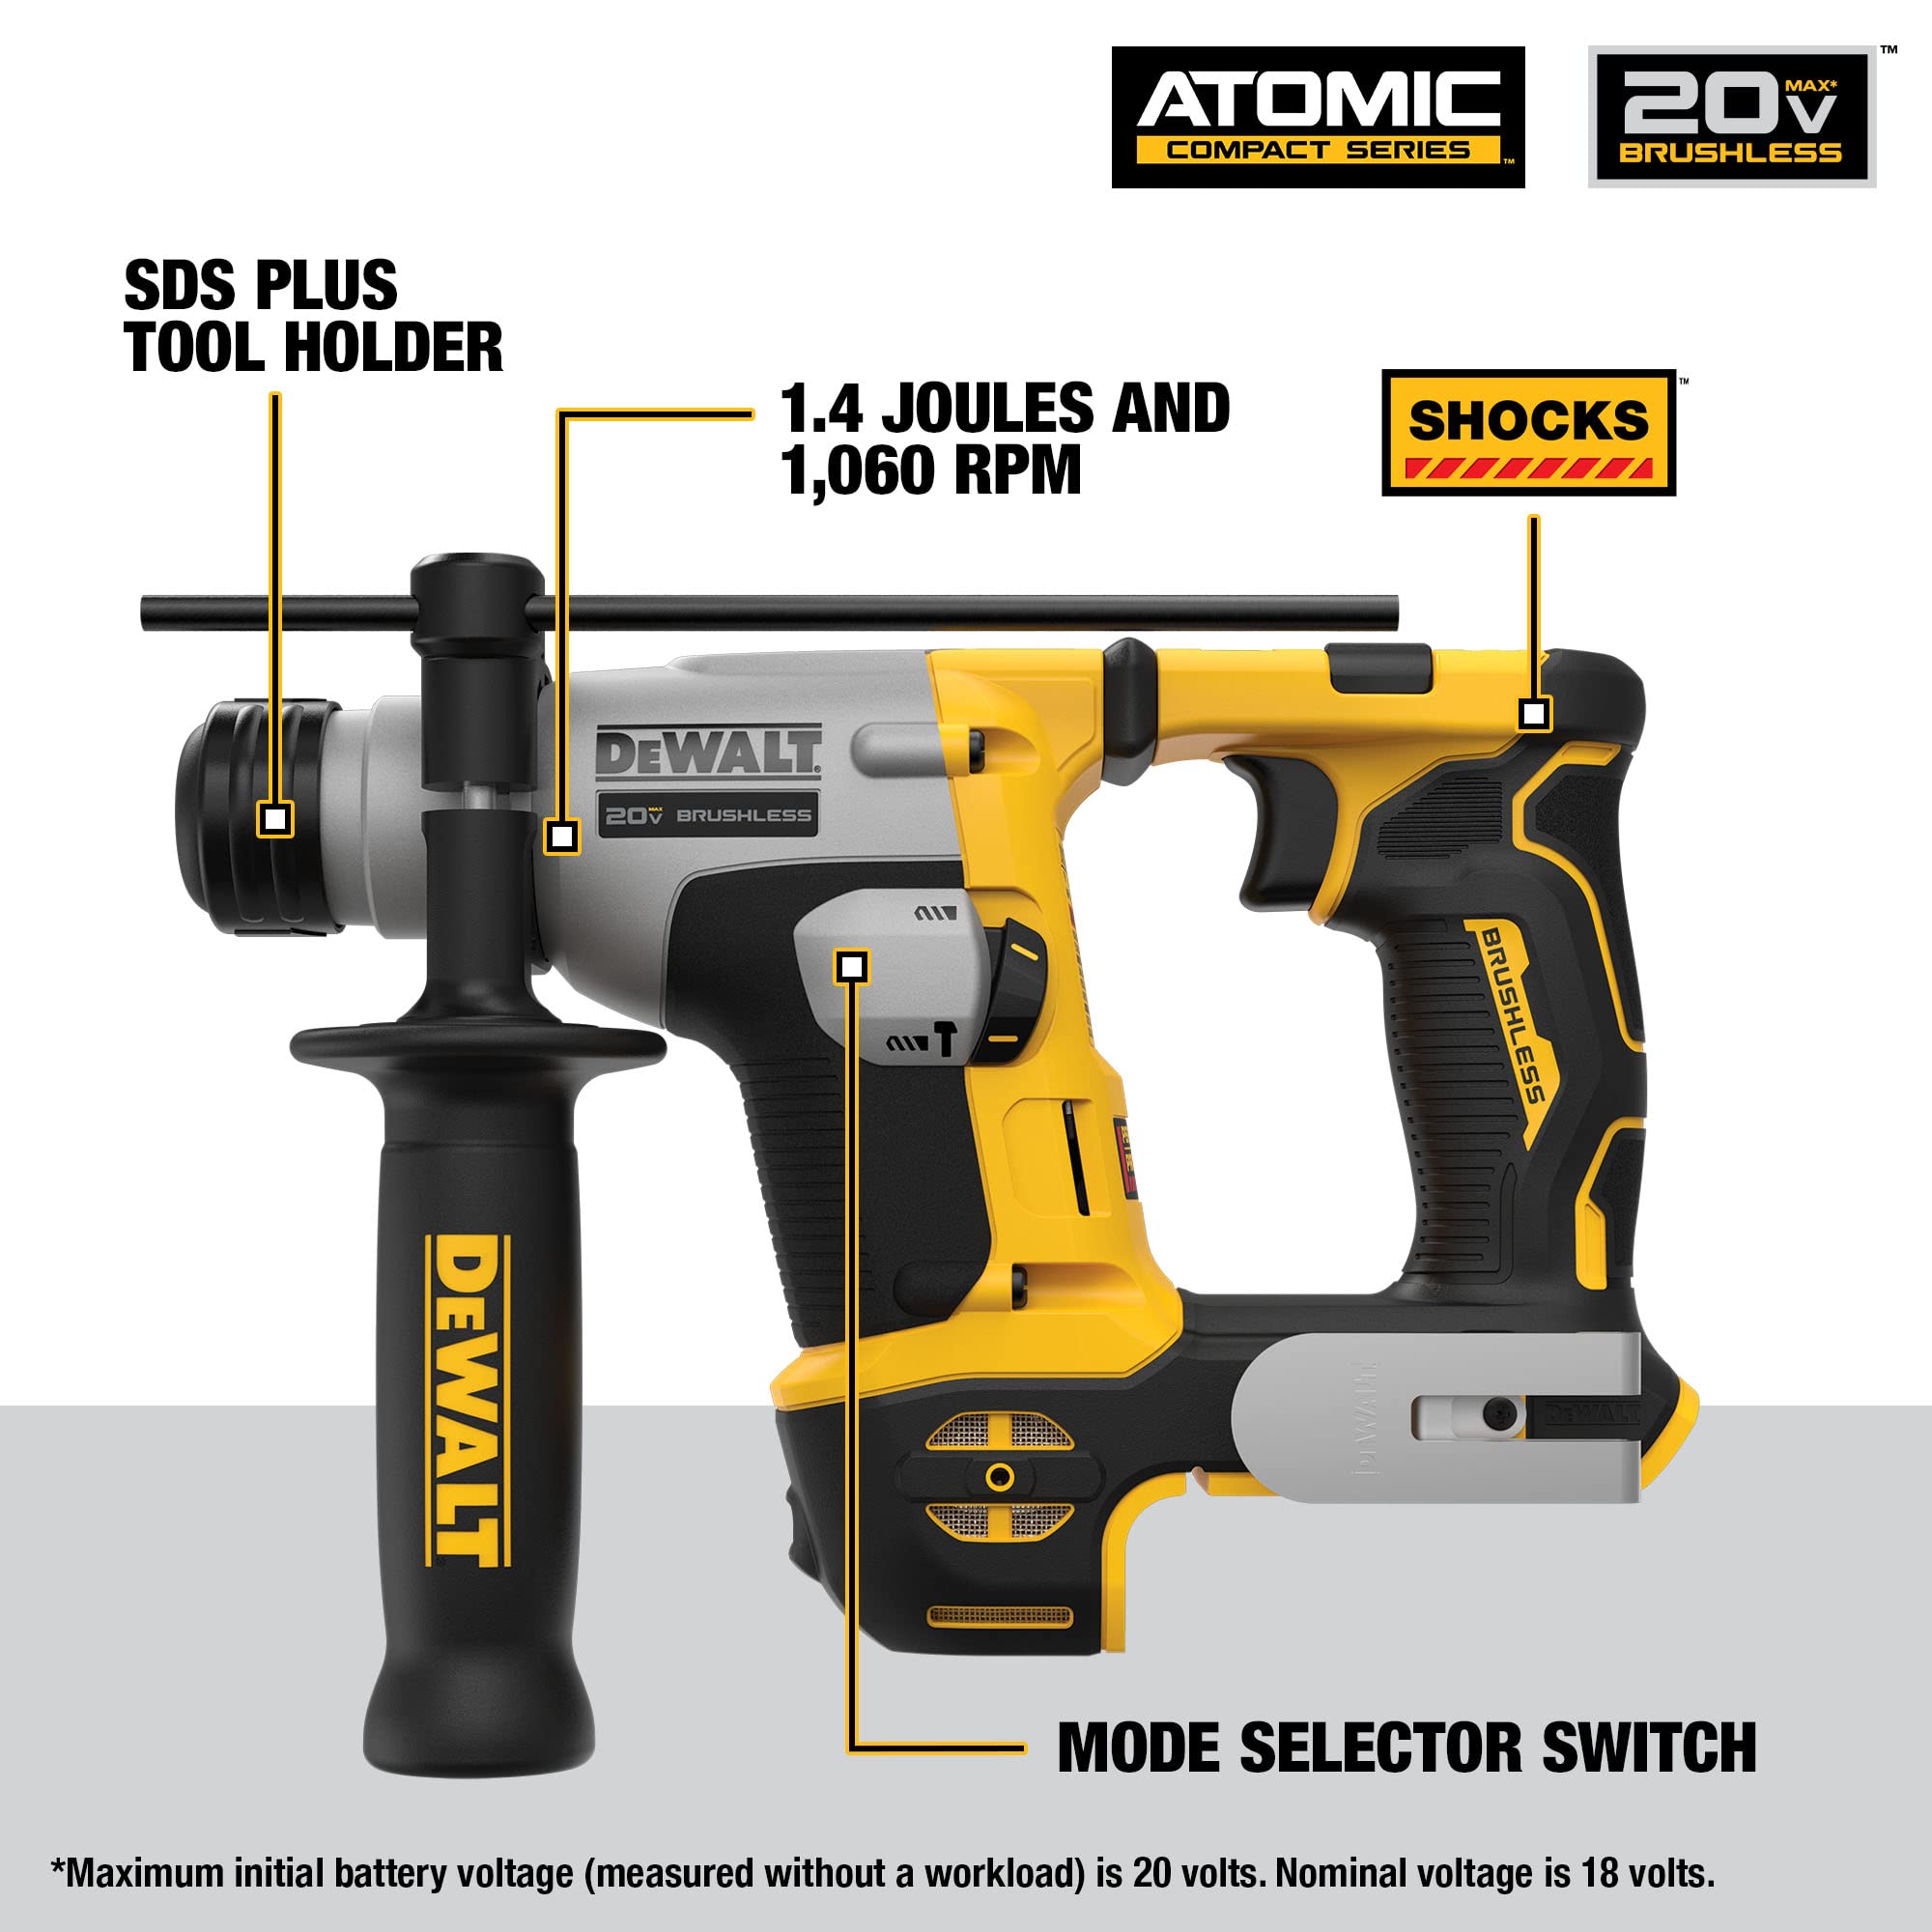 DEWALT 20V MAX SDS Plus Rotary Hammer Drill, Cordless, 5/8 in., Tool Only (DCH172B)